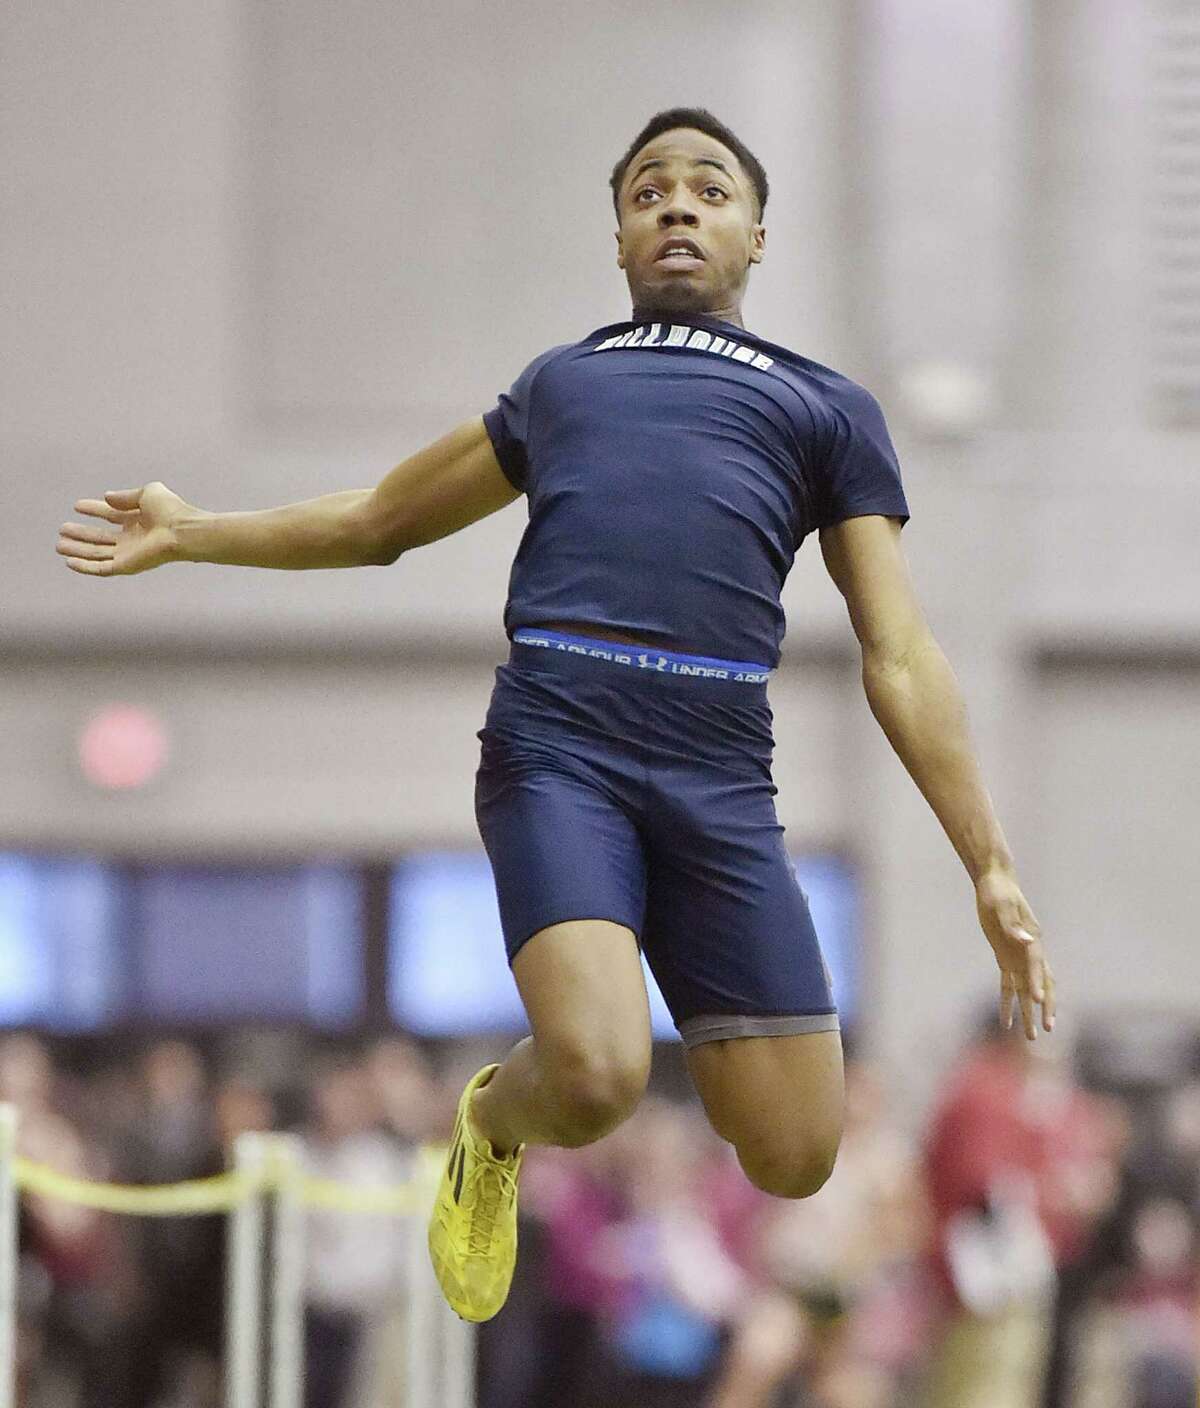 Hillhouse senior Shawn Fletcher lands in at 20′ 8.25″ in the long jump to place fifth and help the Academics win their first SCC Indoor Track championship title since 2008 on Friday, February 6, 2015 at the Floyd Little Athletic Center in New Haven. (Photo Catherine Avalone)